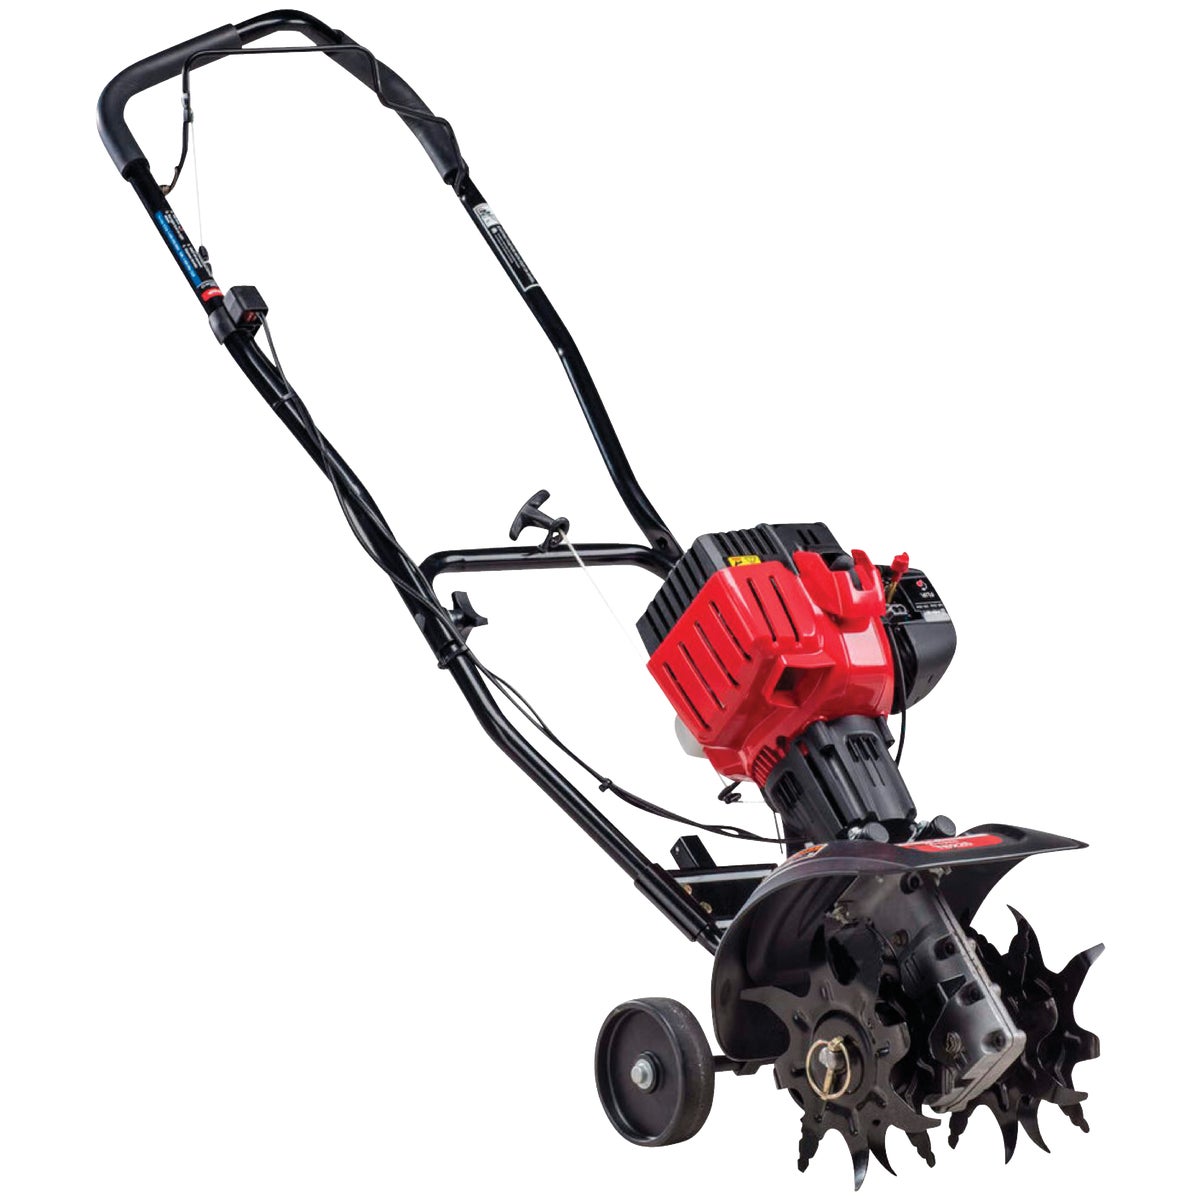 Item 730300, Aerating your gardens and flowerbeds is simple with the TB225 25cc 2-cycle 